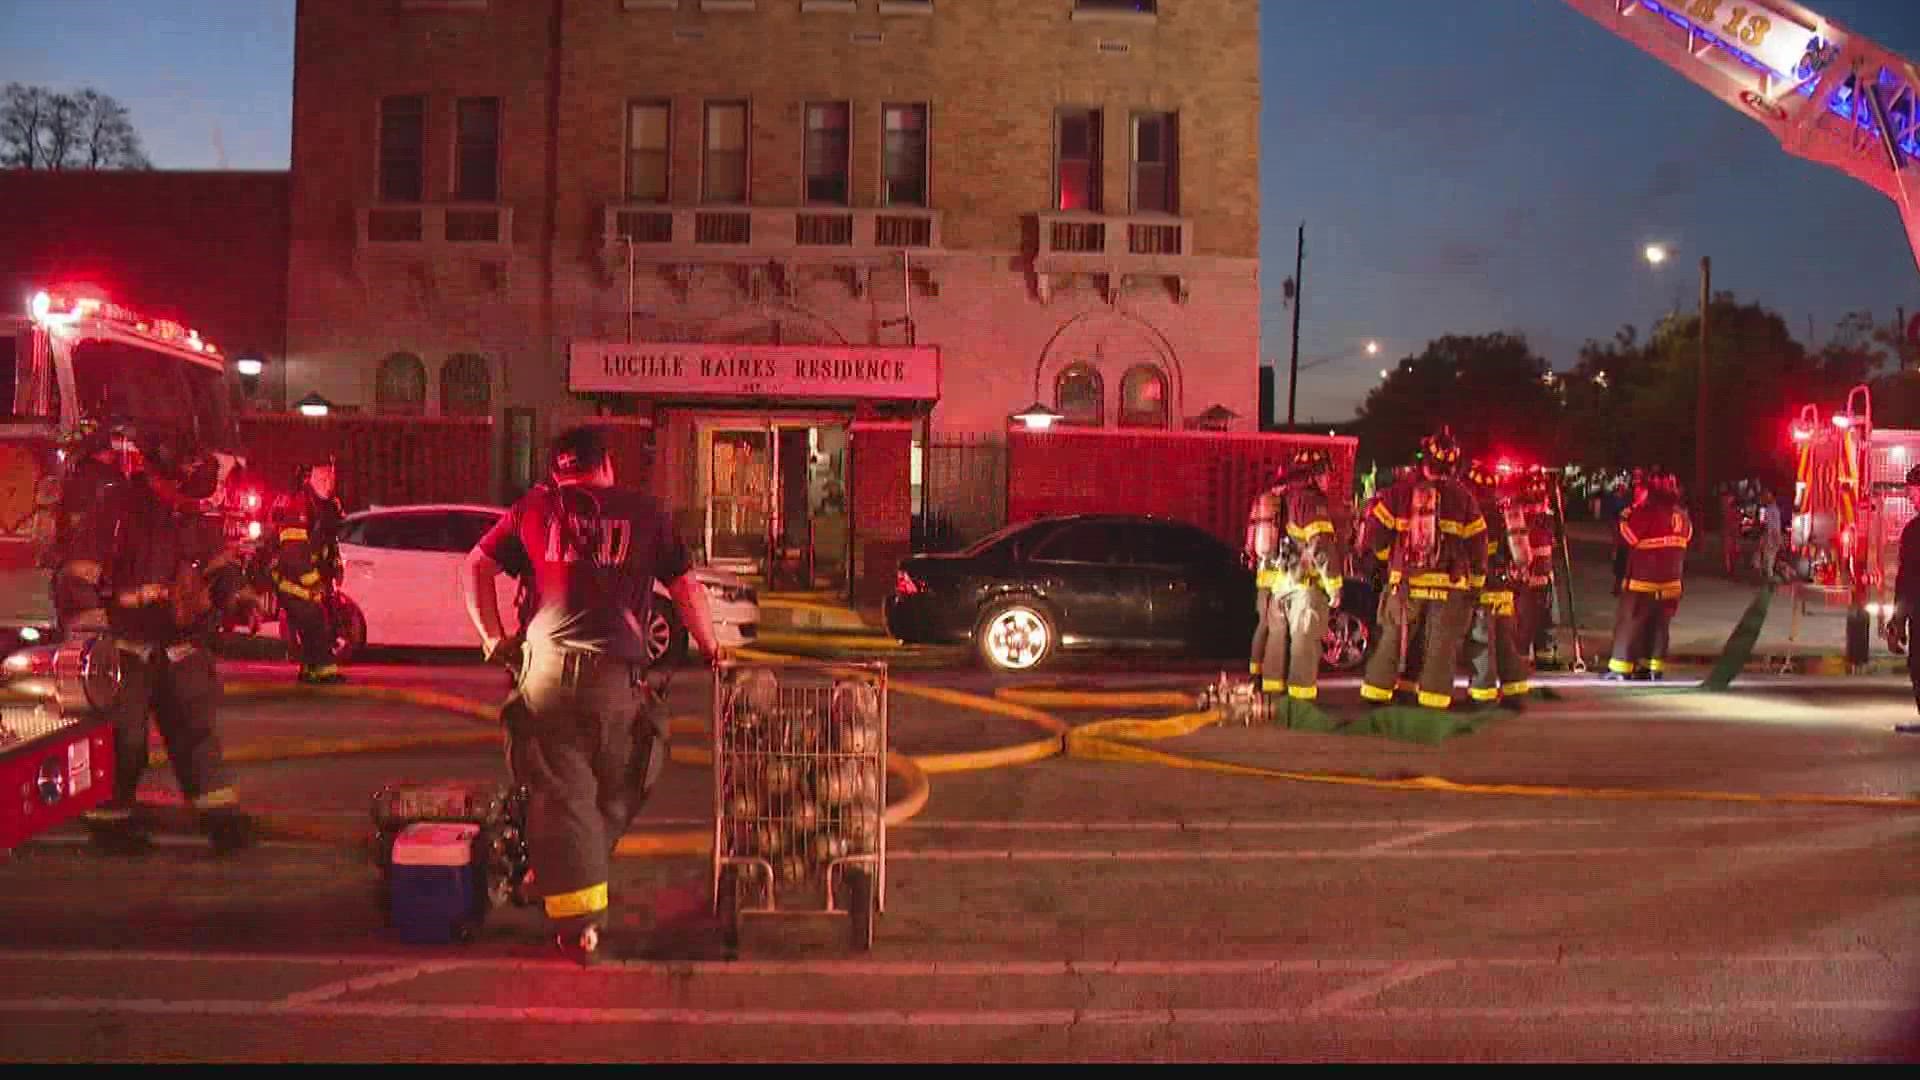 IFD said the fire happened at an apartment complex near 10th and North Pennsylvania streets.